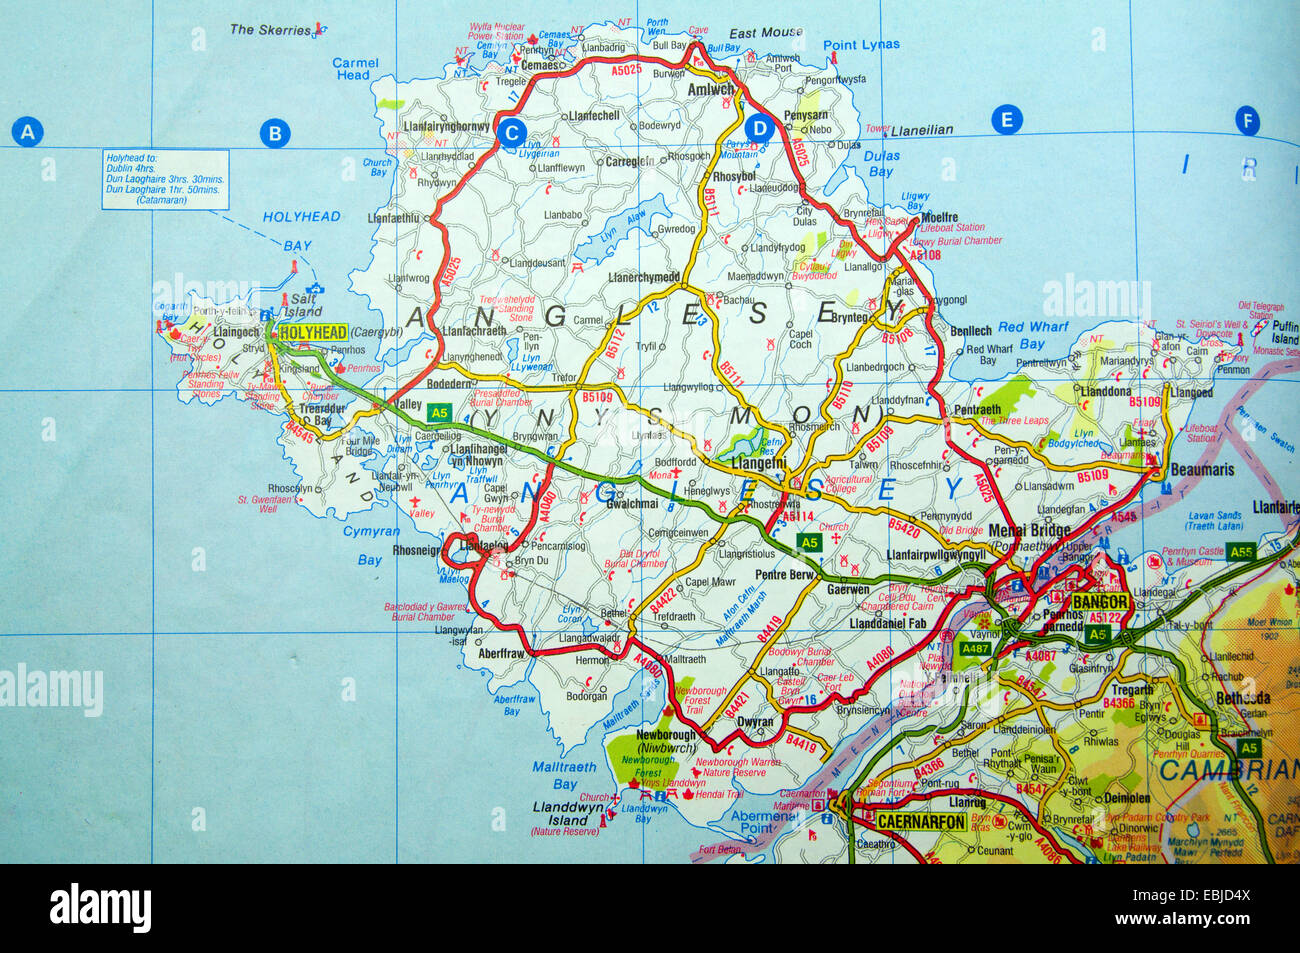 Road Map of Aglesey/ Ynys Mon, North Wales. Stock Photo